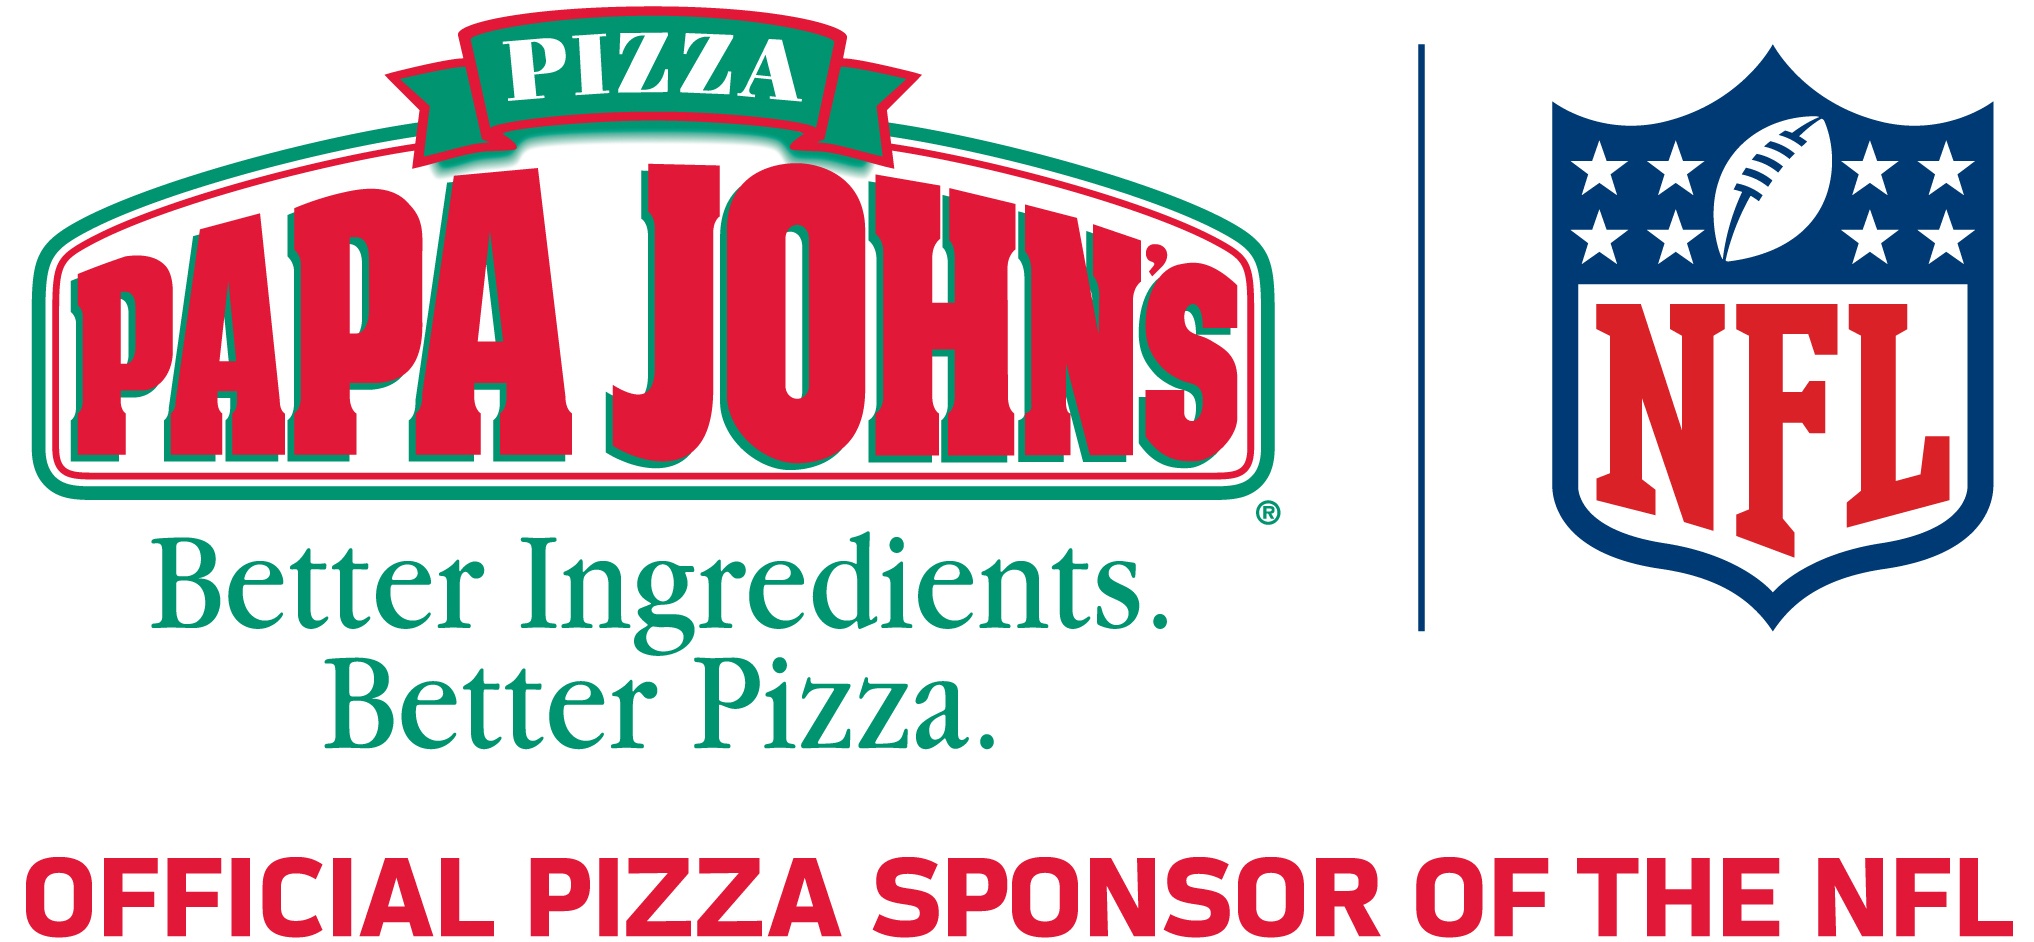 Papa John’s Teams with NFL Network and Pepsi for Special Thursday Night